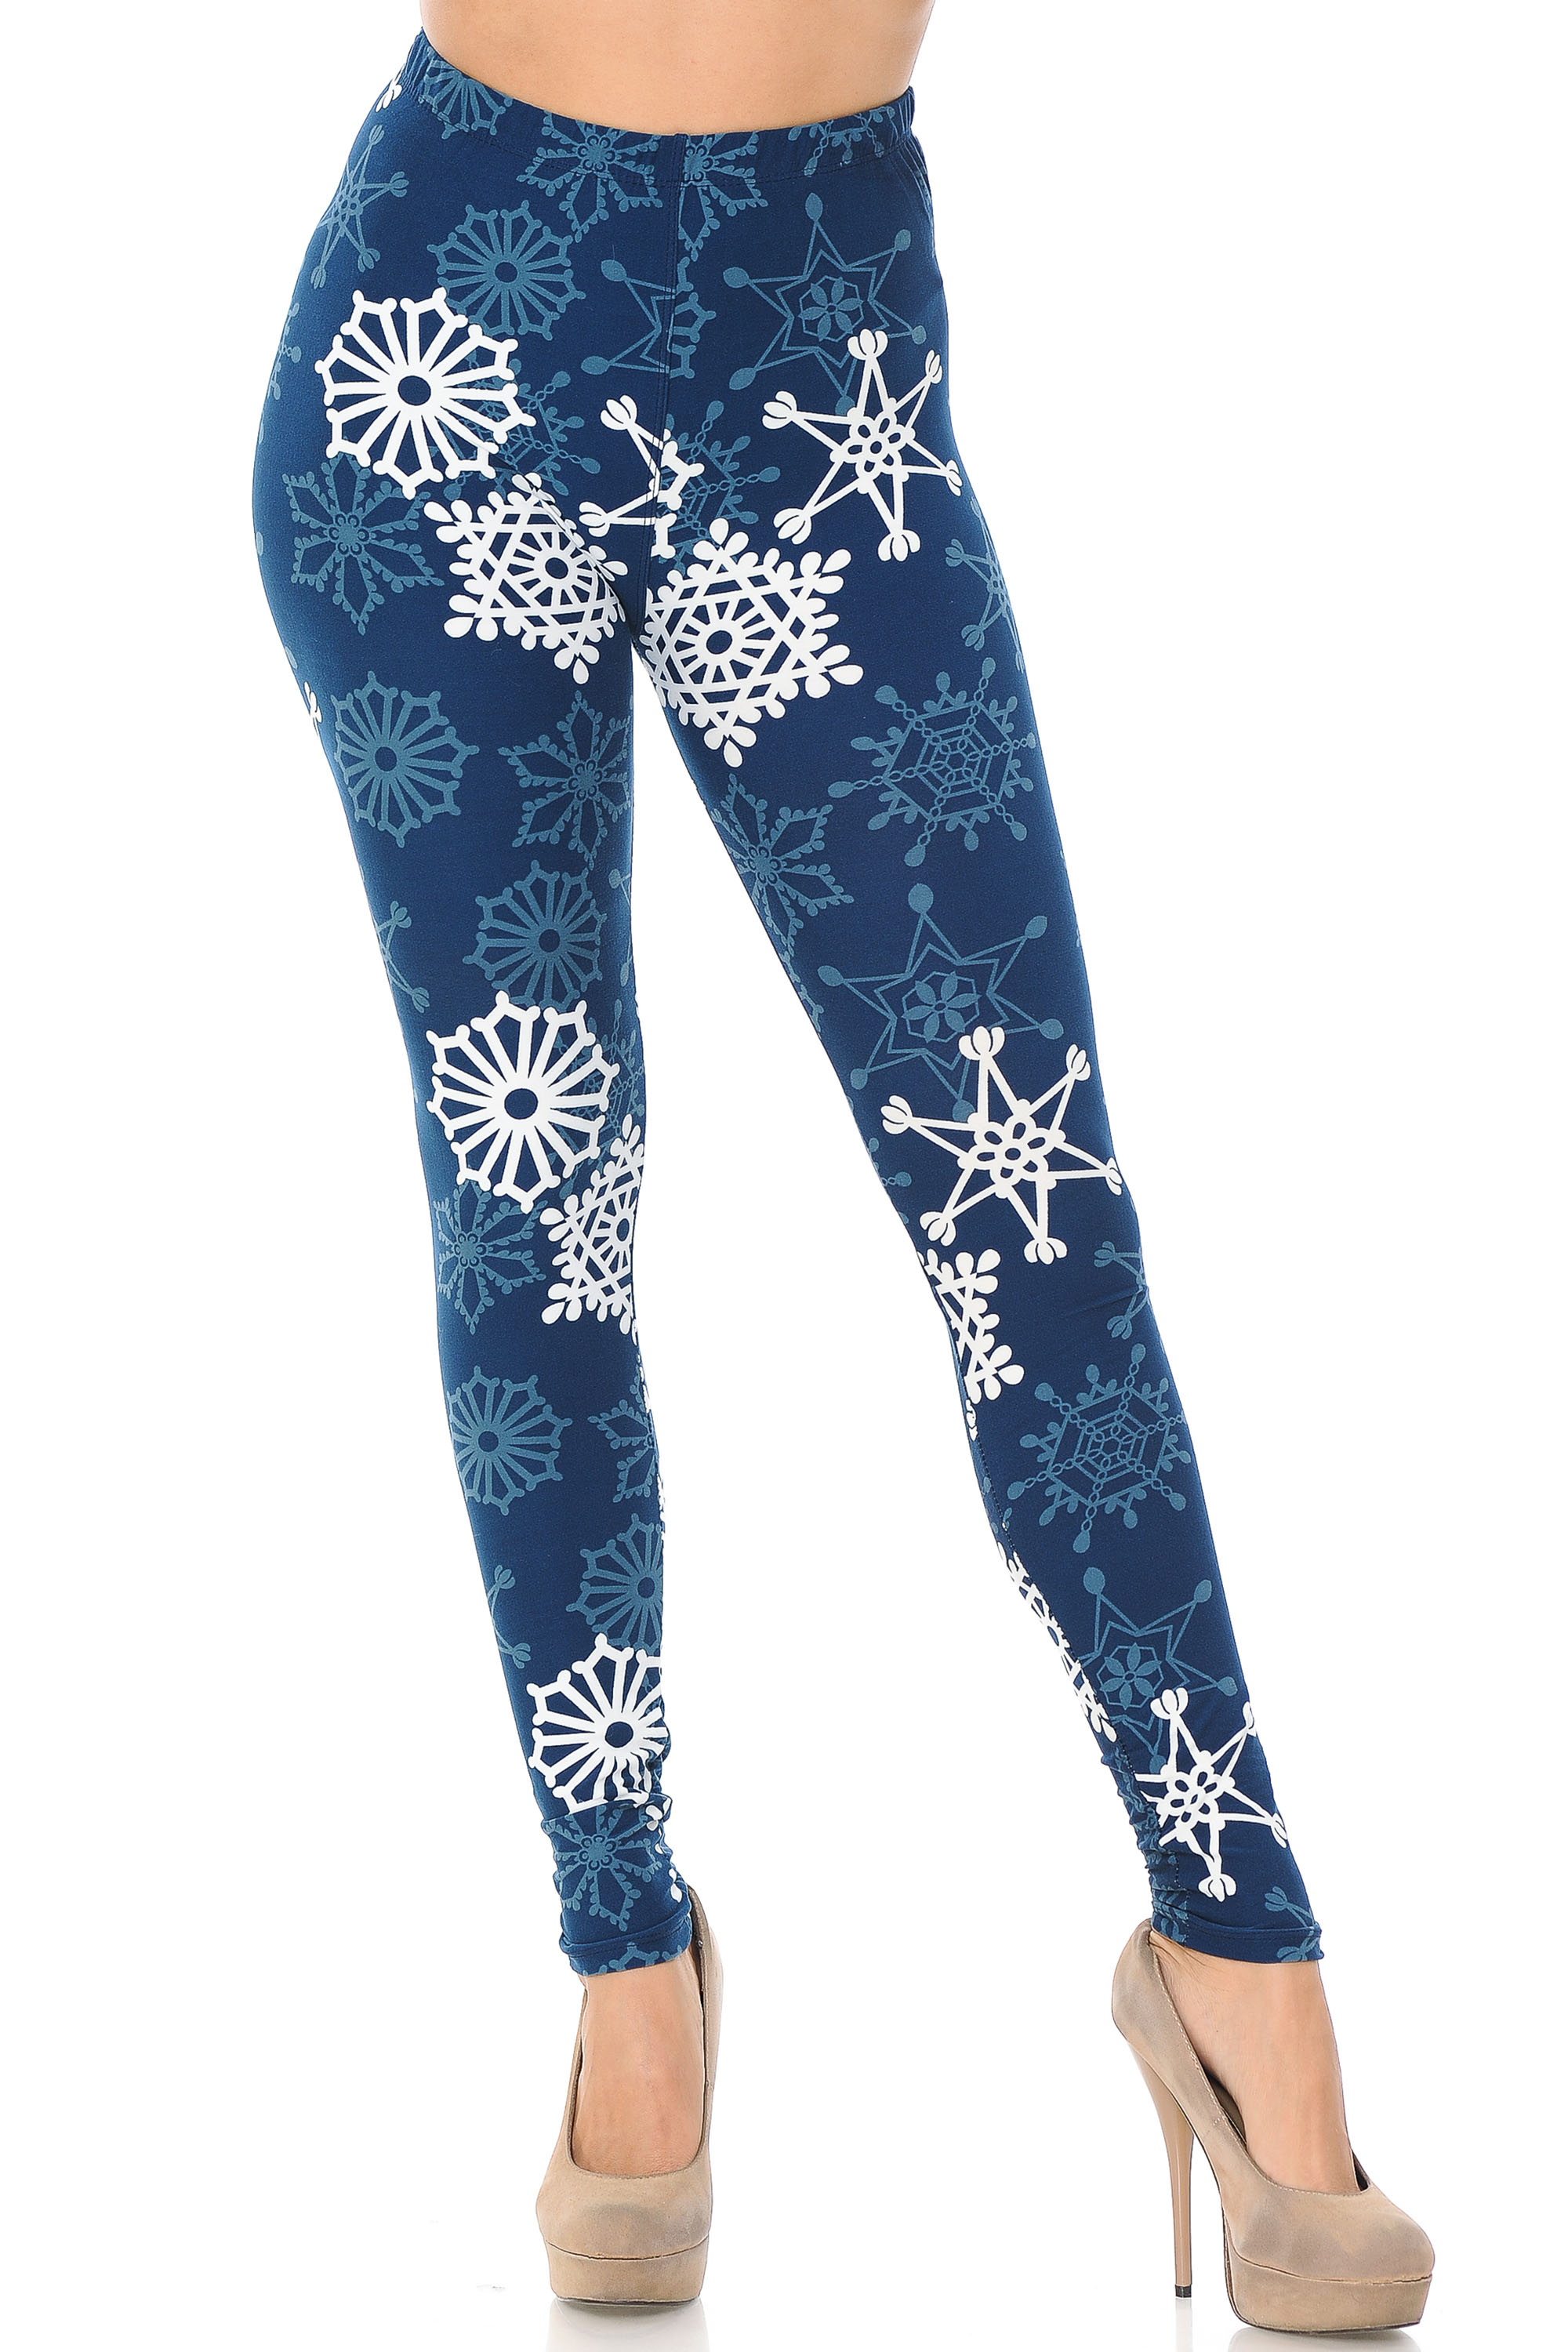 Wholesale Buttery Smooth Gorgeous Snowflakes Leggings